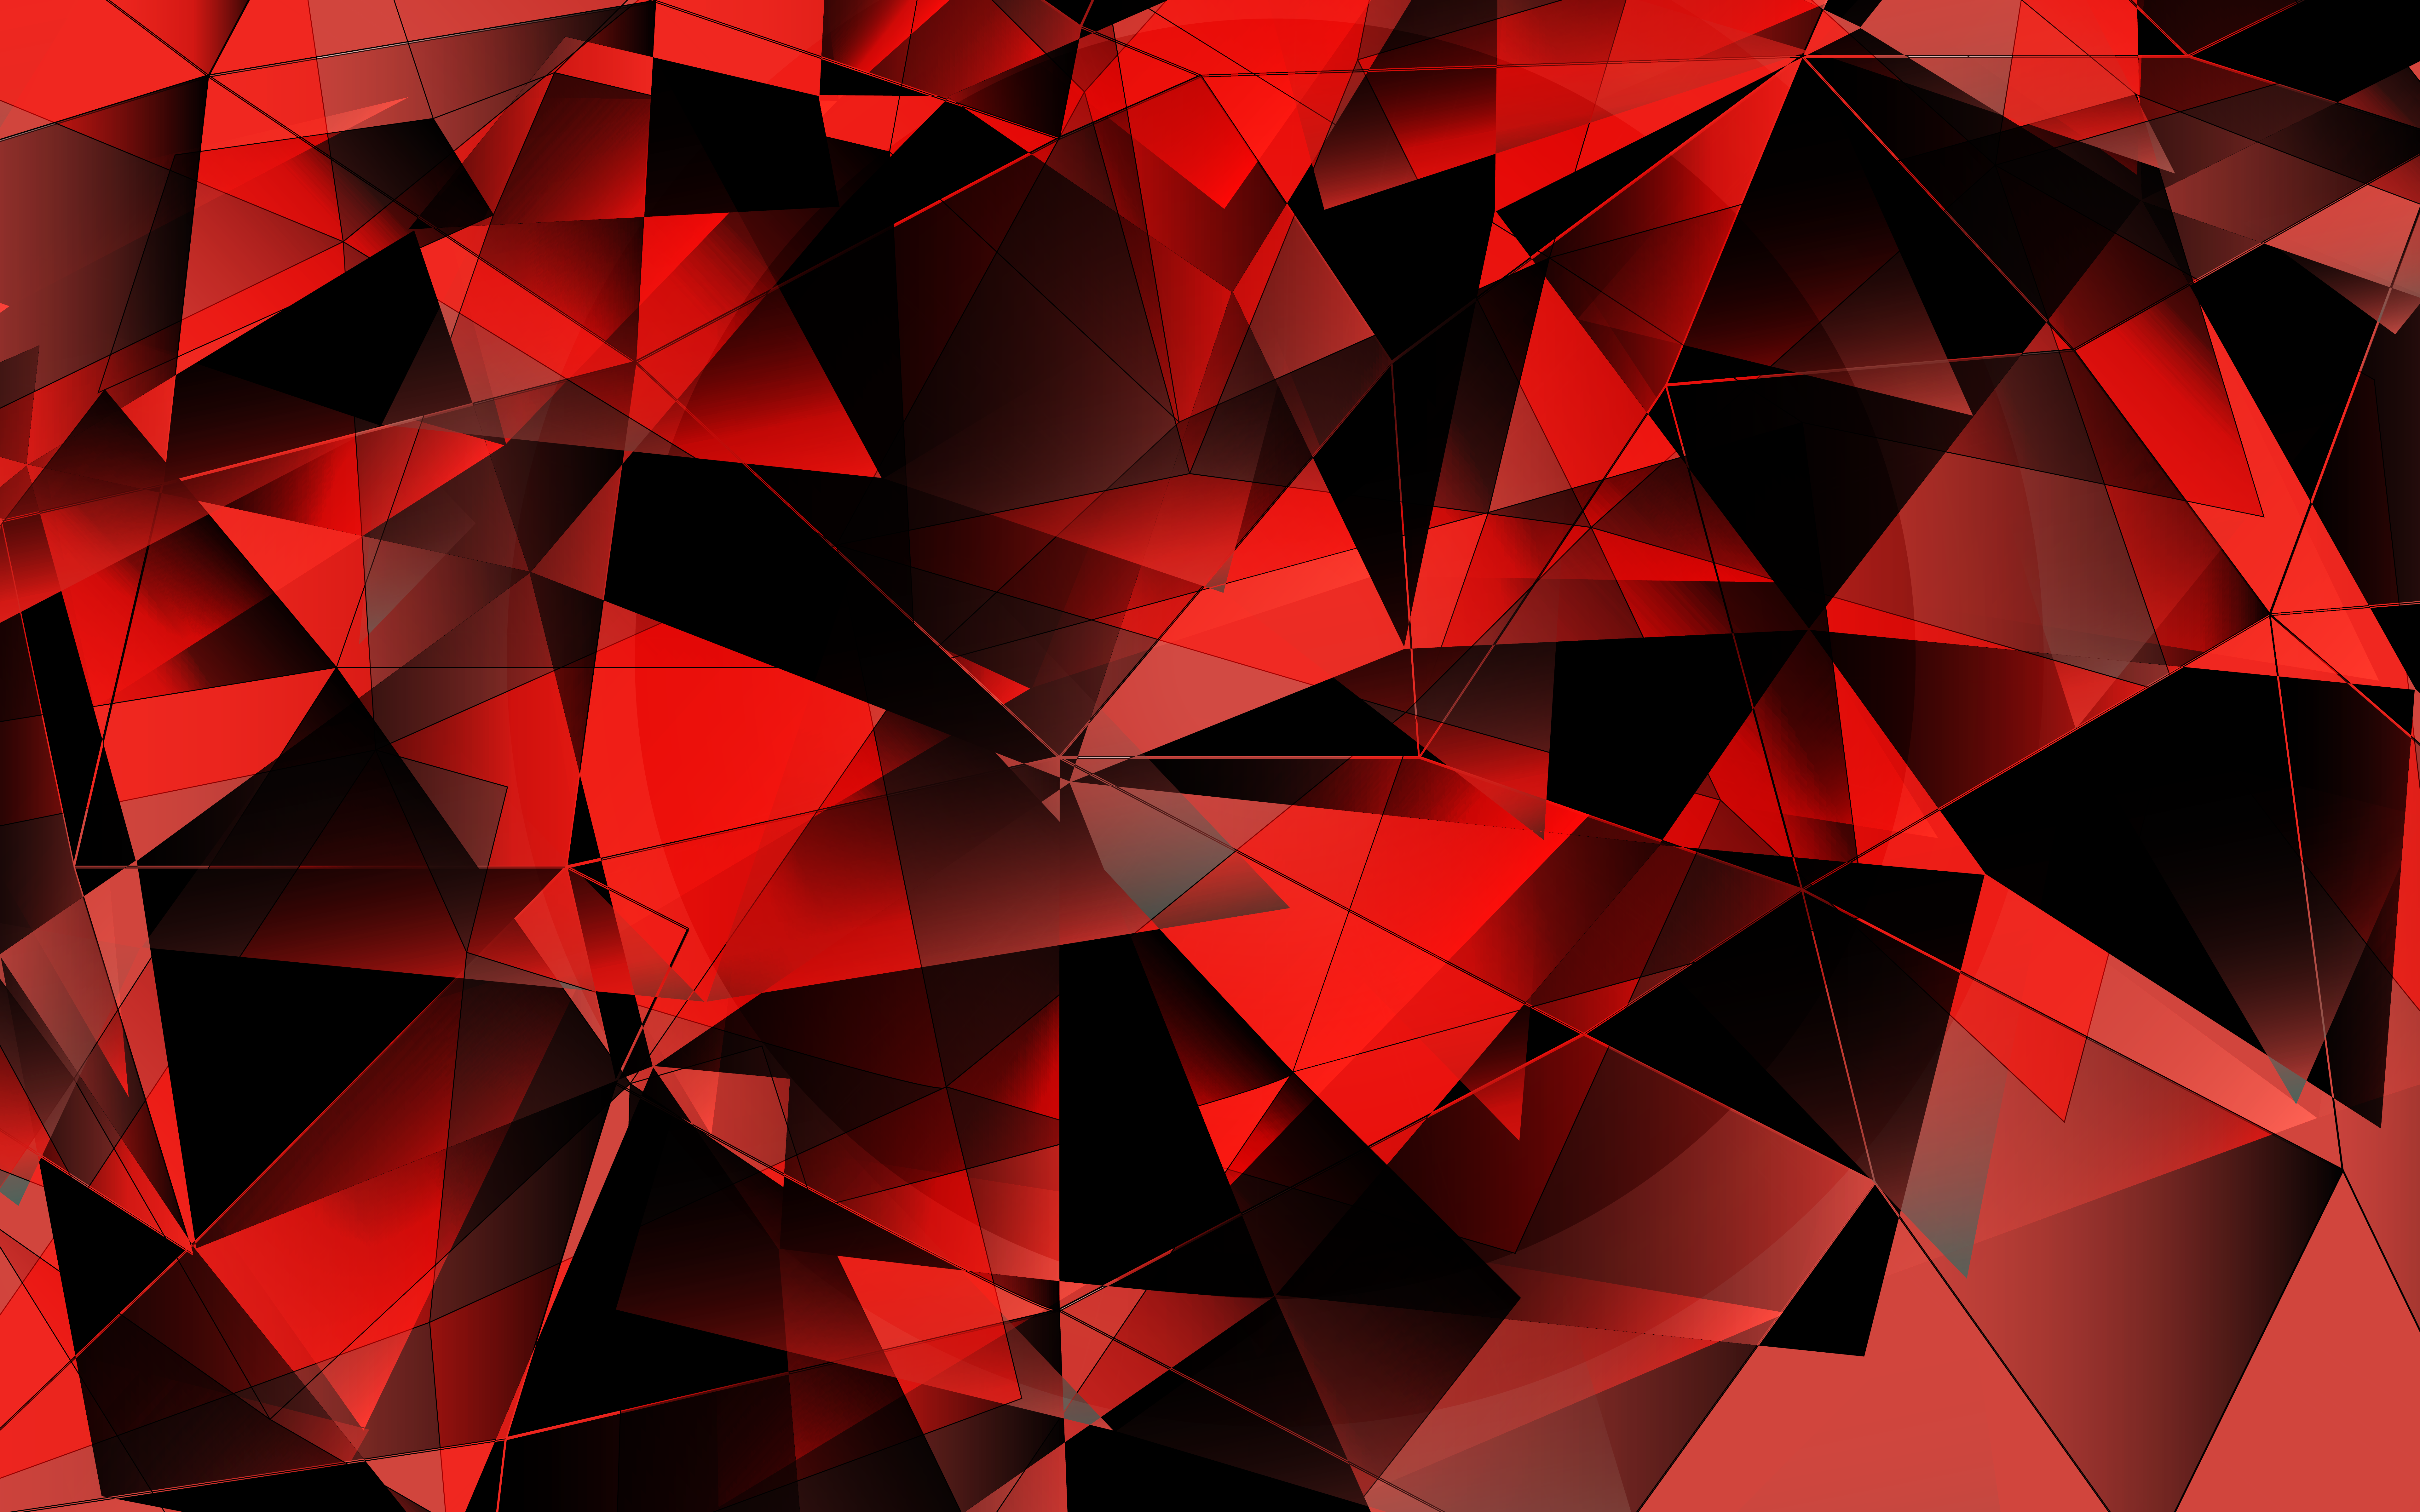 Abstract Shapes 8k Ultra HD, Red Gallery HD Wallpaper